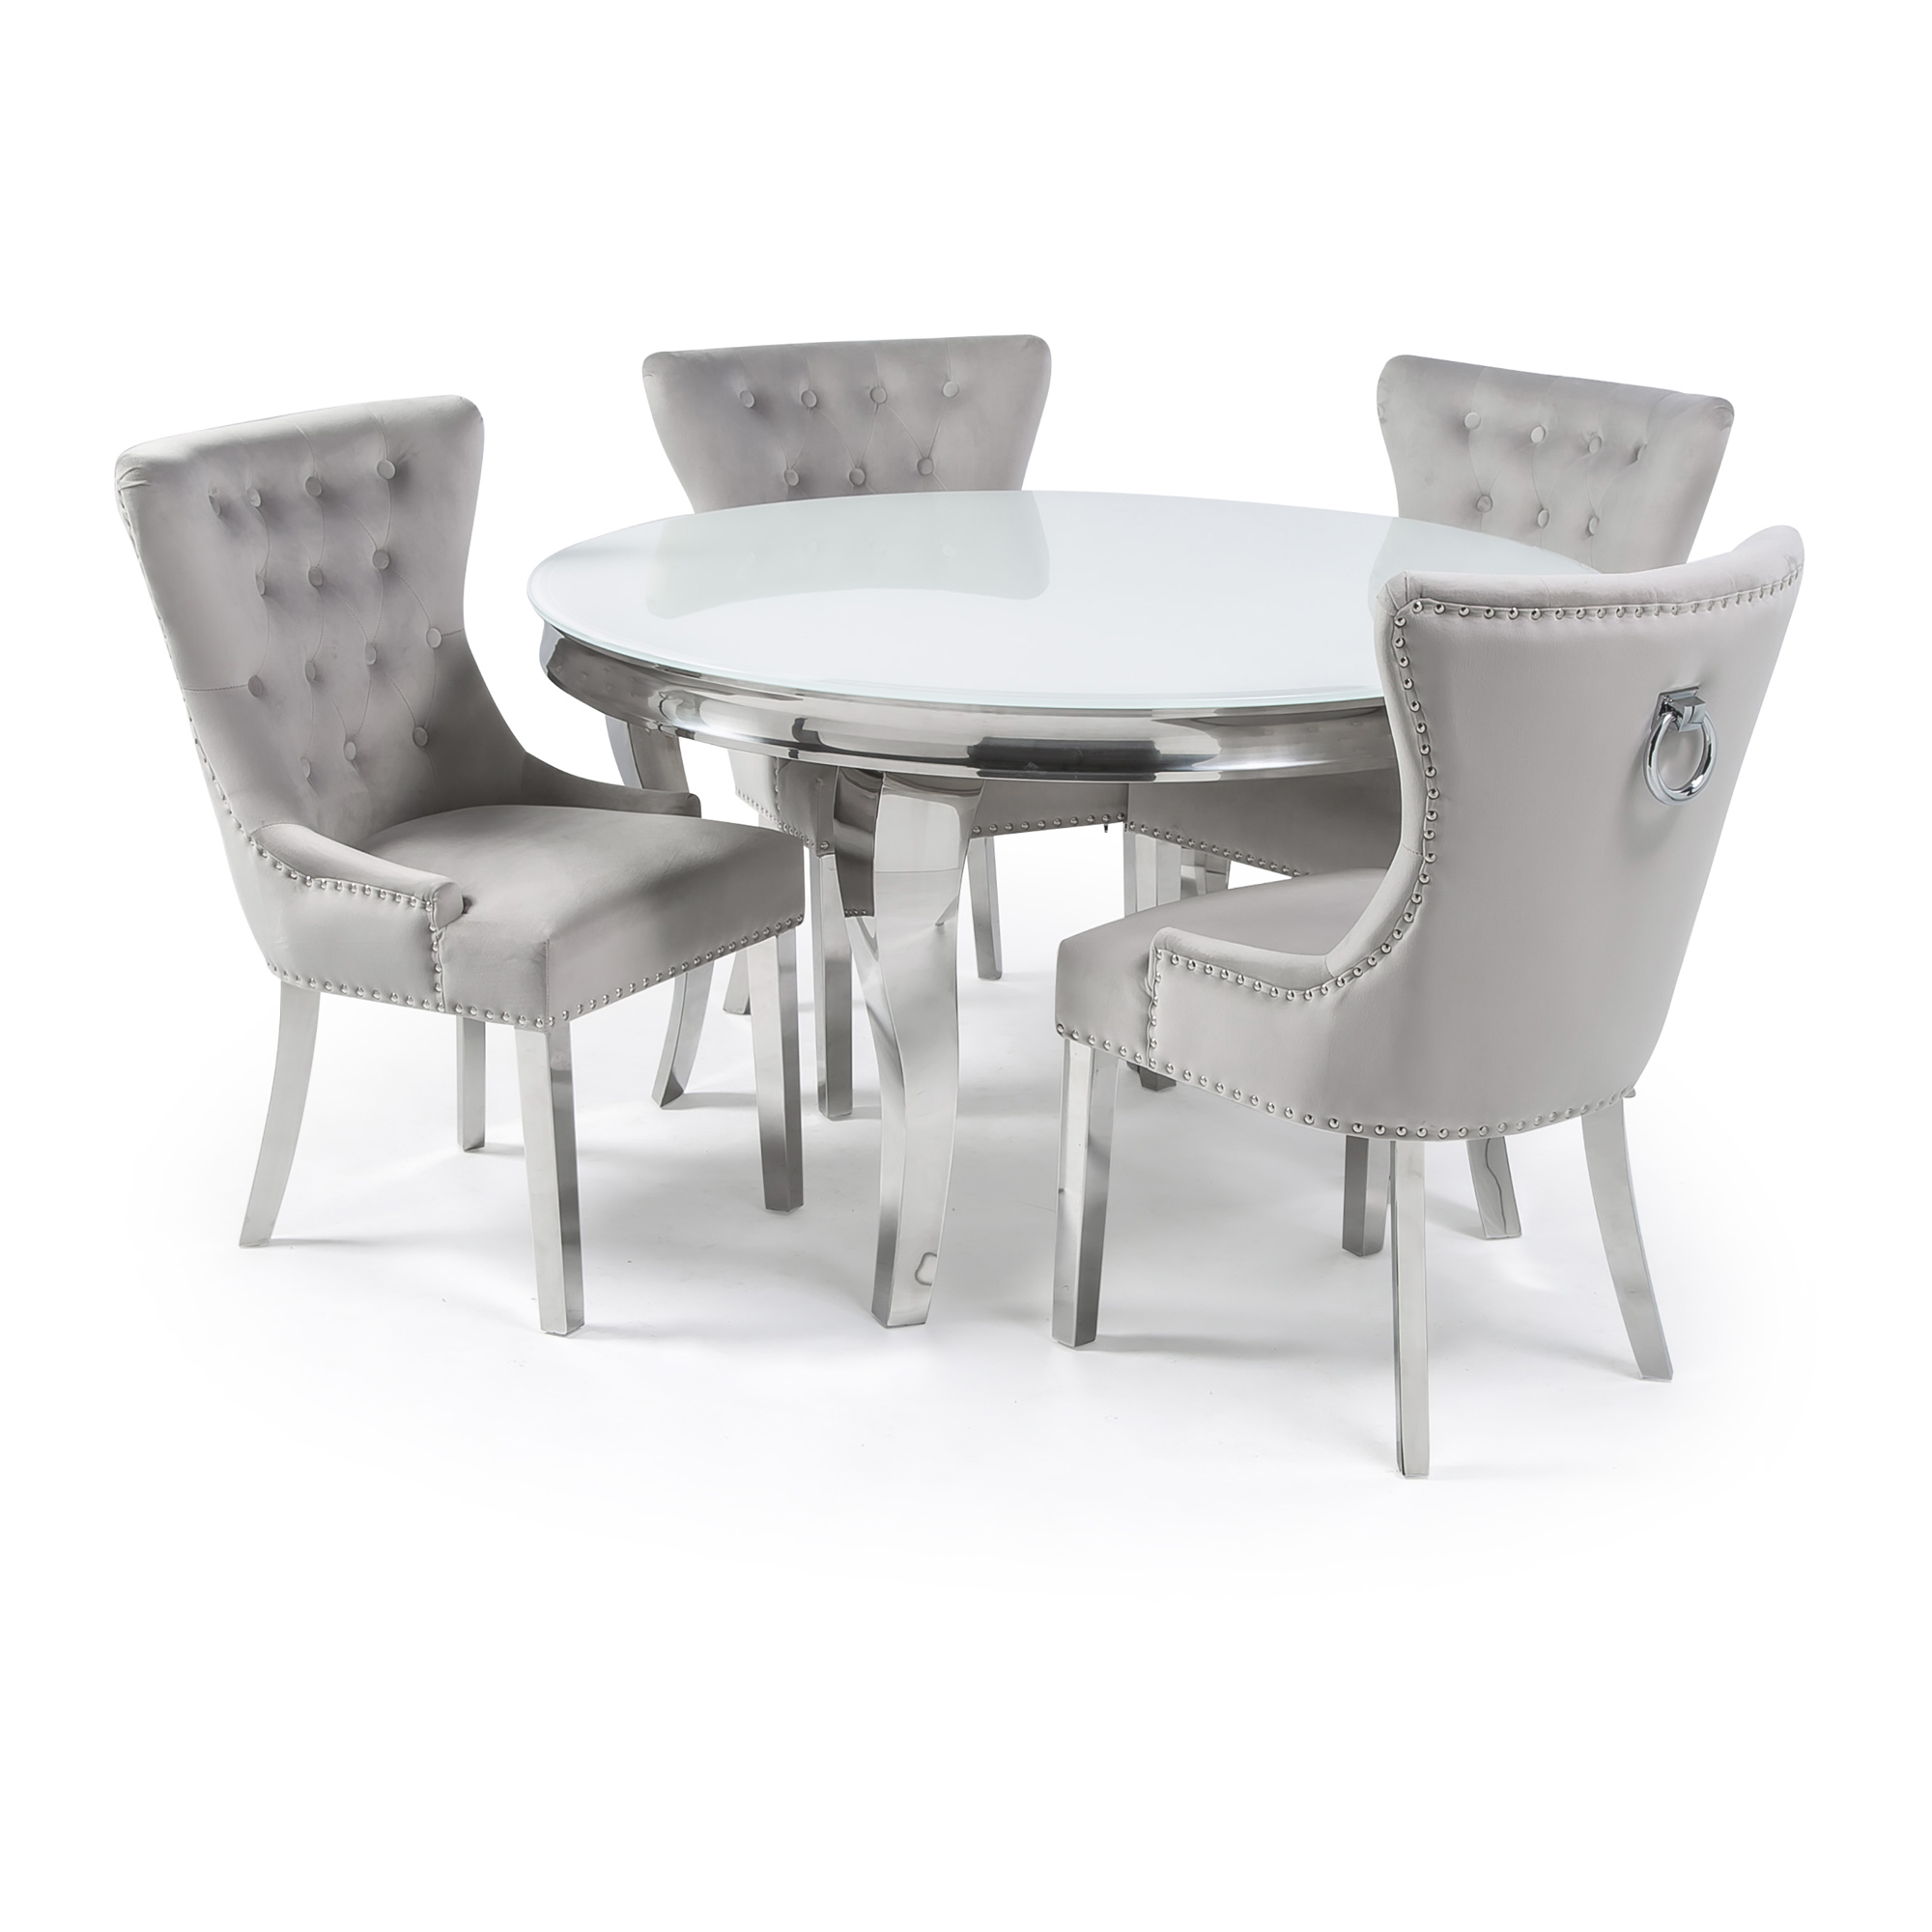 1.3m Louis Round Steel & White Glass Dining Table Set x 4 Dove Grey Dining Chairs